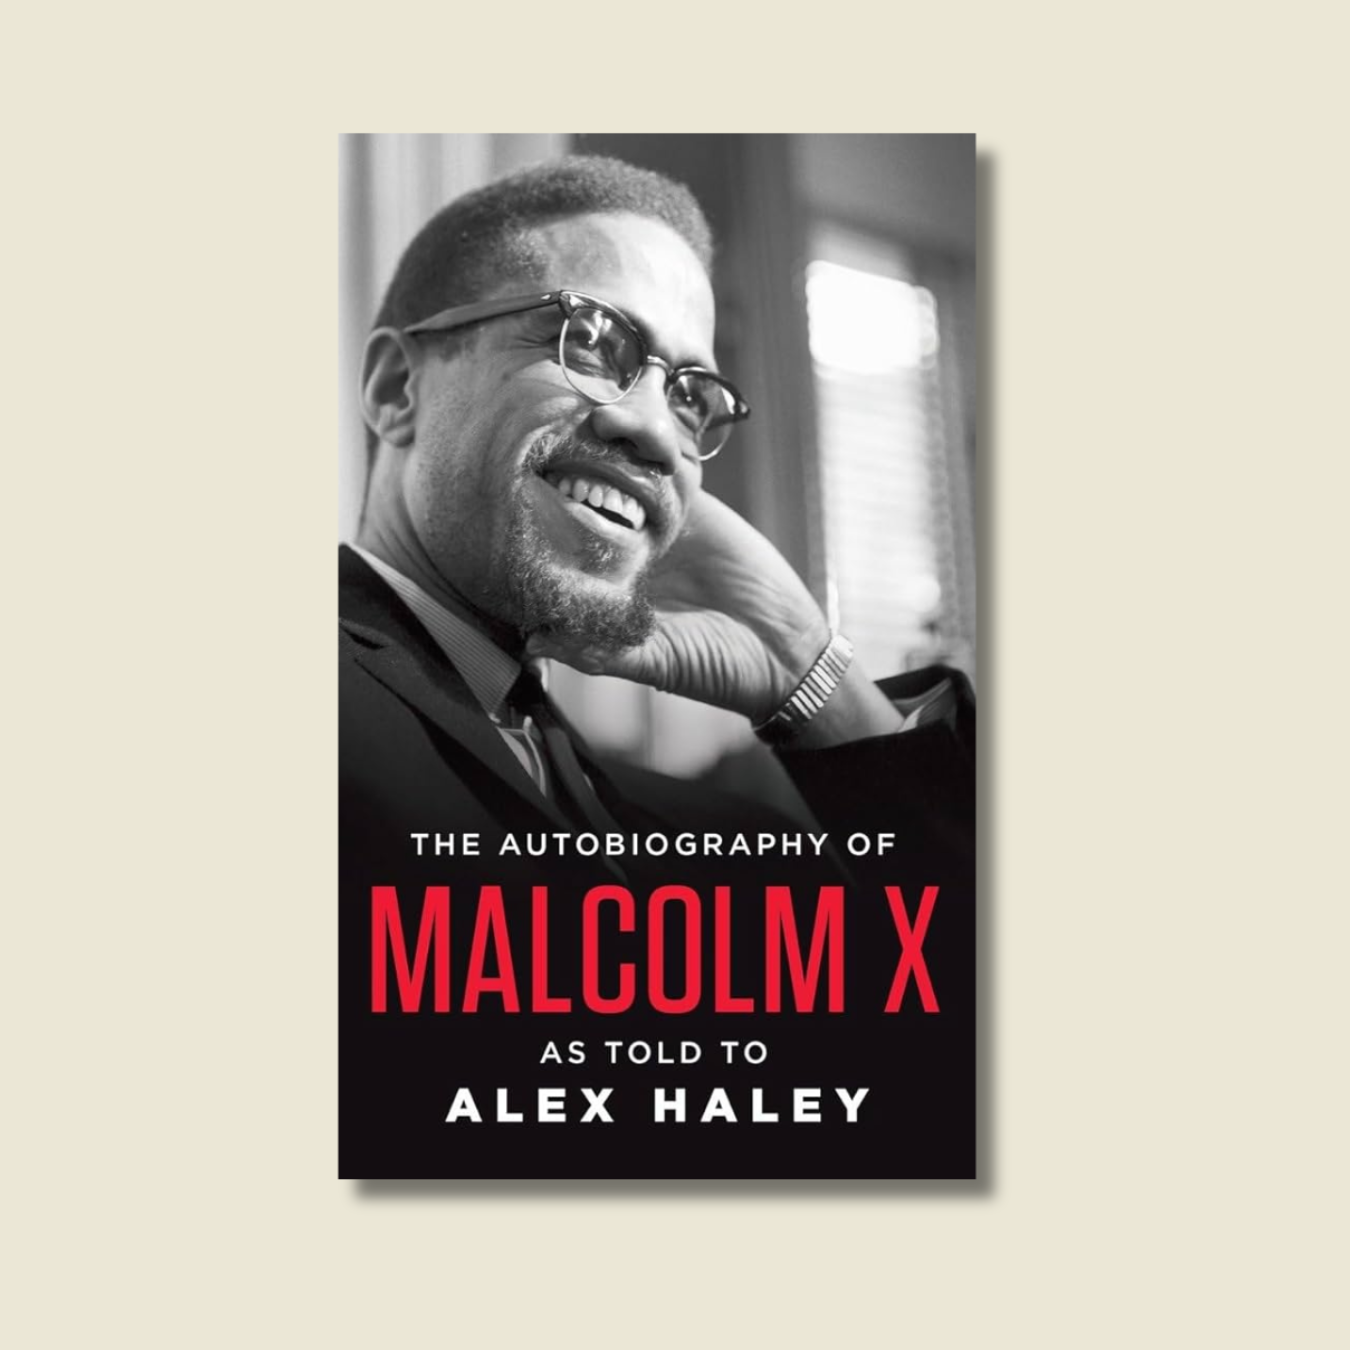 THE AUTOBIOGRAPHY OF MALCOLM X BY ALEX HALEY AND MALCOLM X